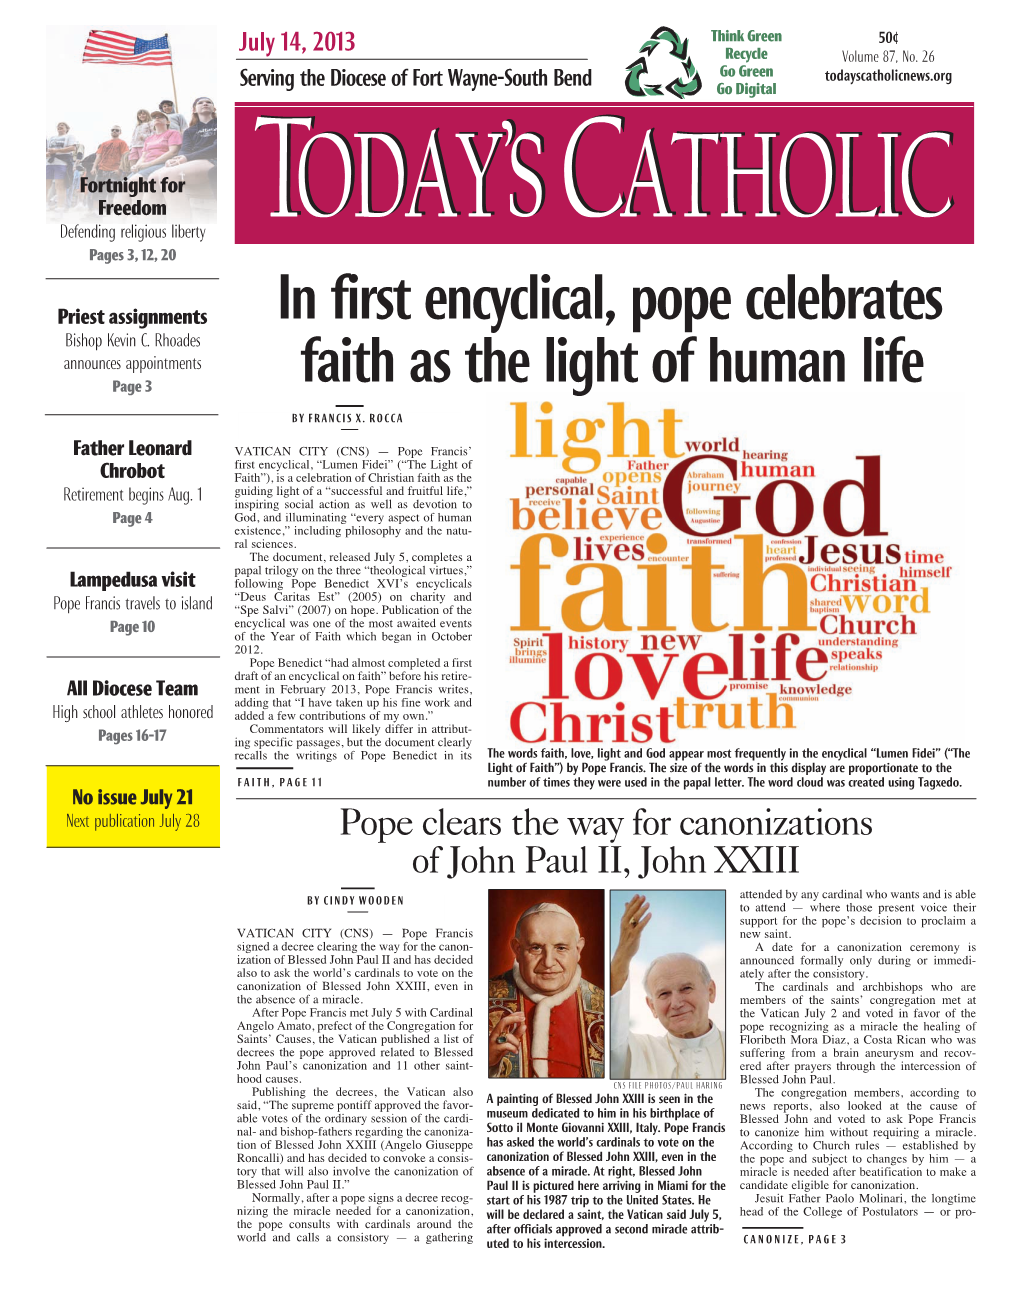 In First Encyclical, Pope Celebrates Faith As the Light of Human Life